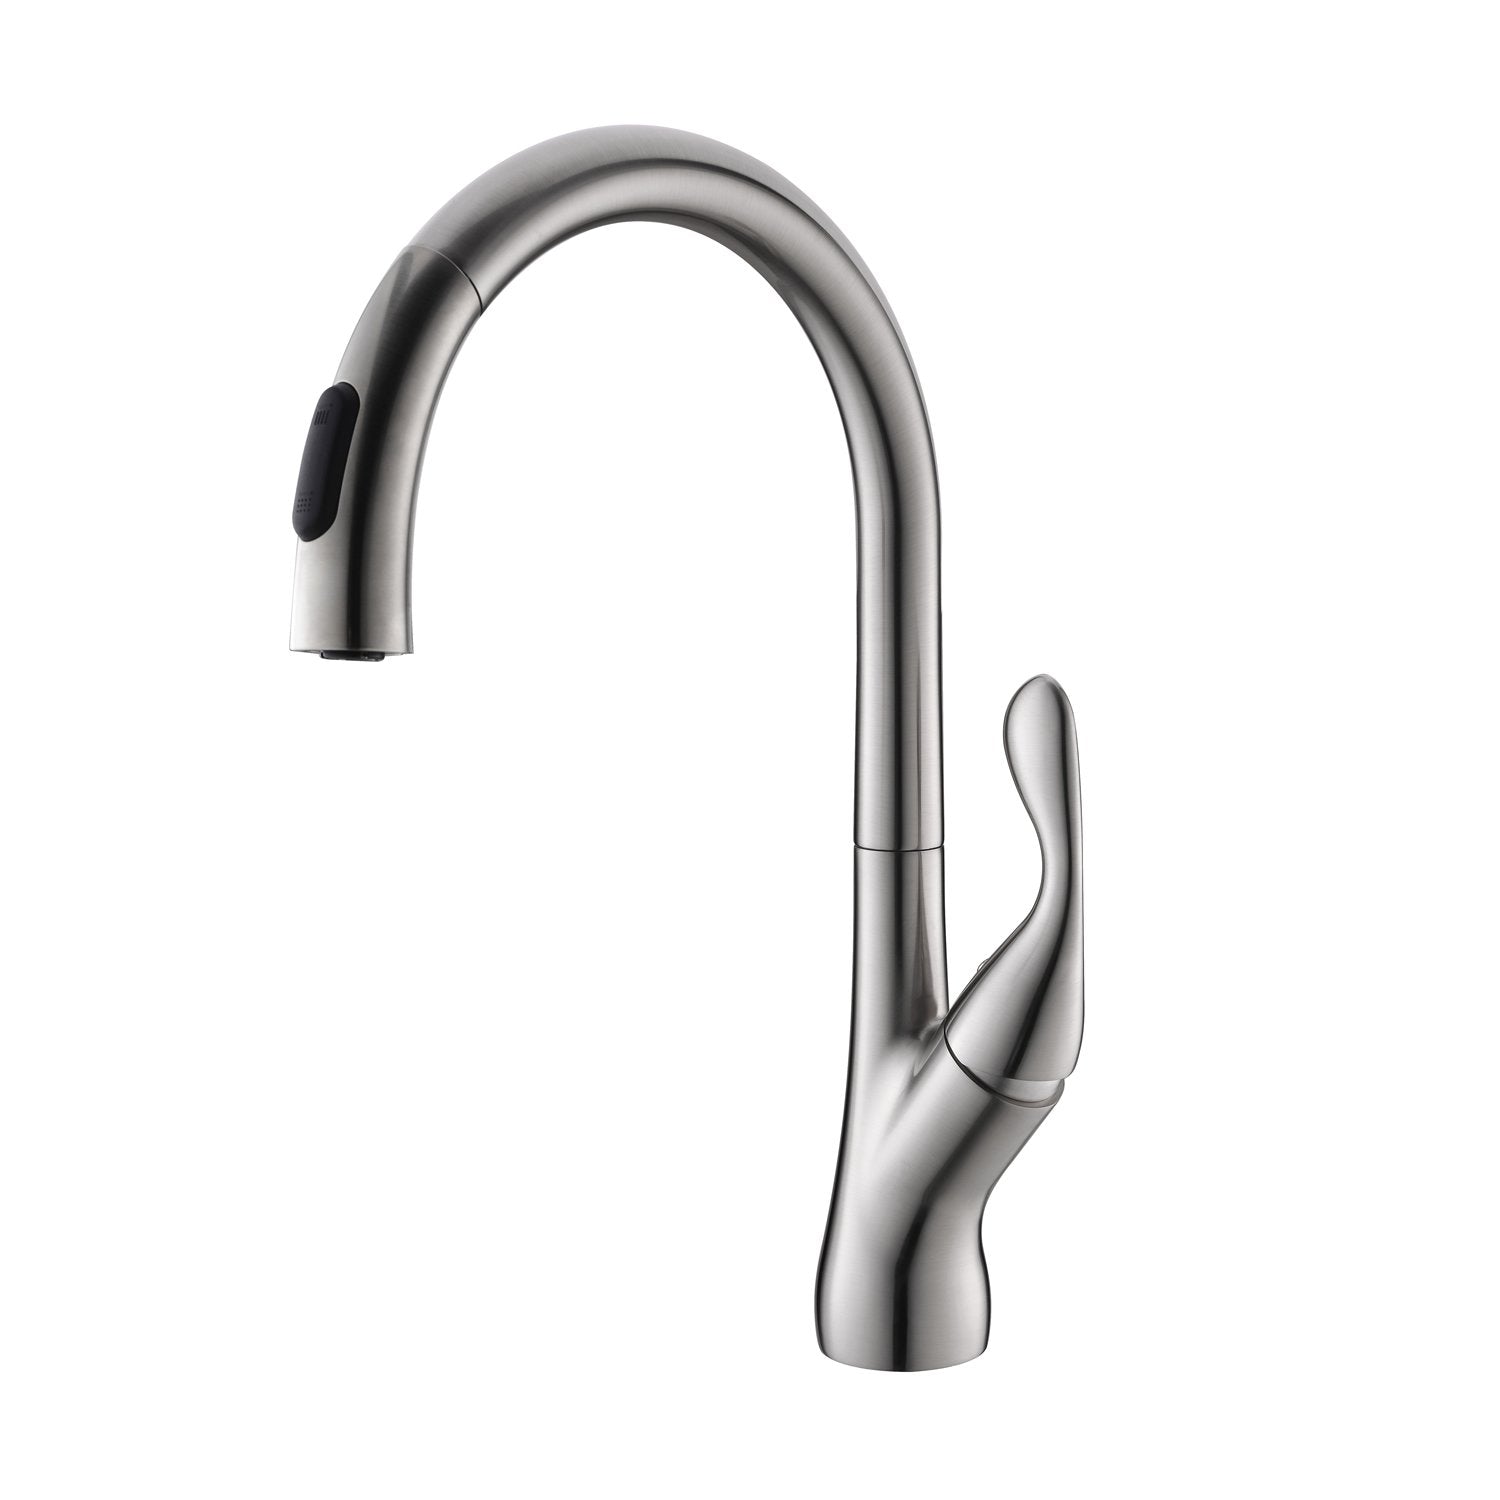 DAX Single Handle Pull Down Kitchen Faucet with Dual Sprayer and Swivel Spout, Brass Body, Brushed Nickel Finish, 9-1/8 x 15-5/8 Inches (DAX-6985E-BN)